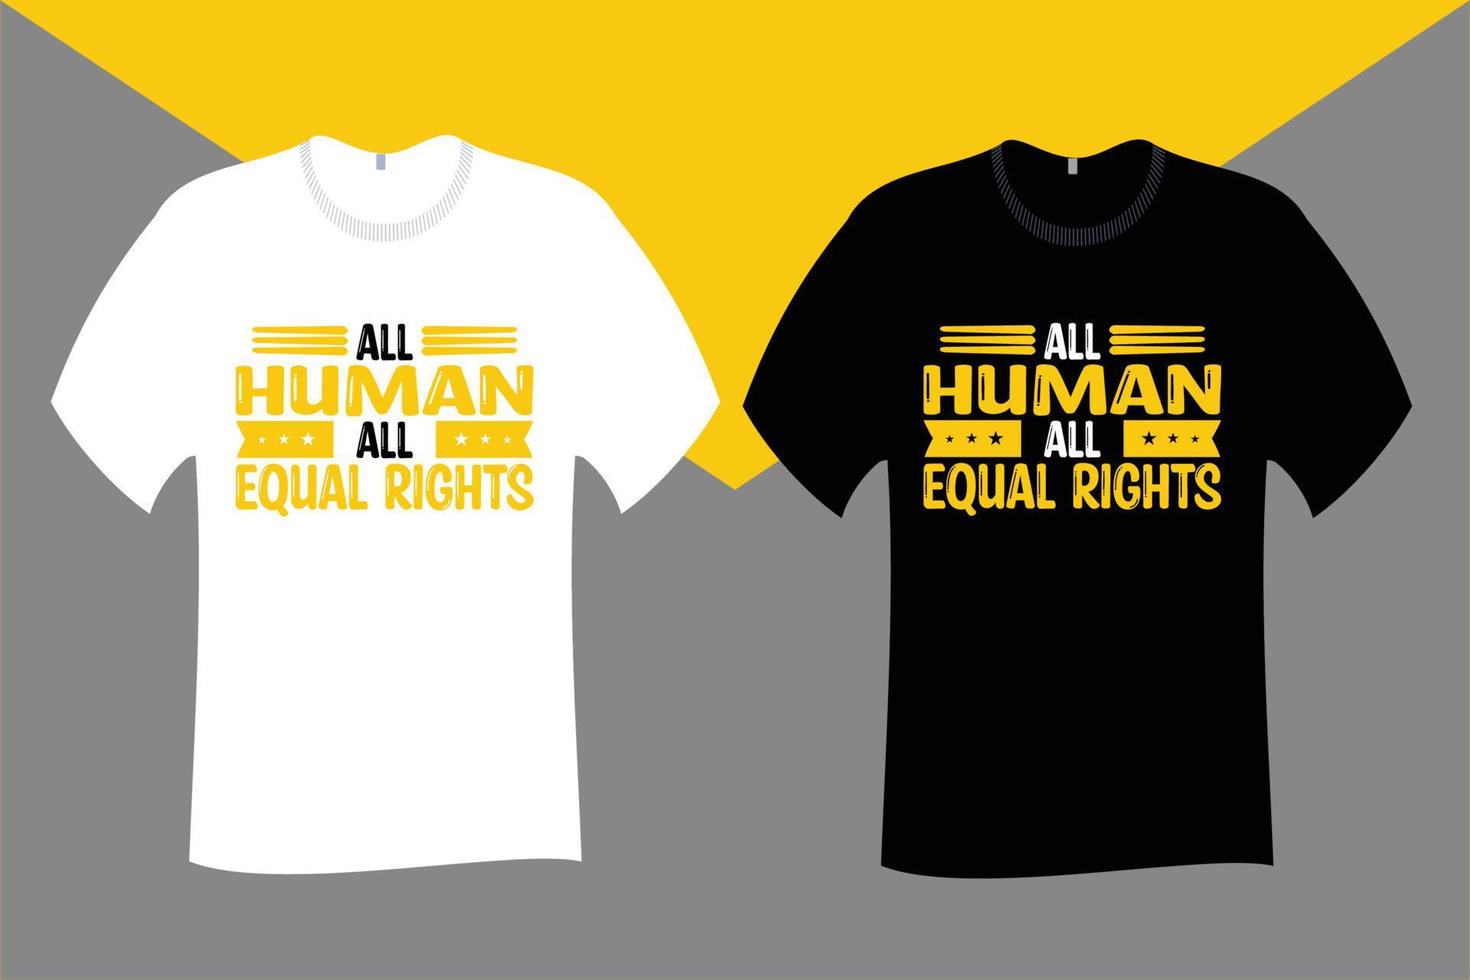 All Human All Equal Rights T Shirt Design vector